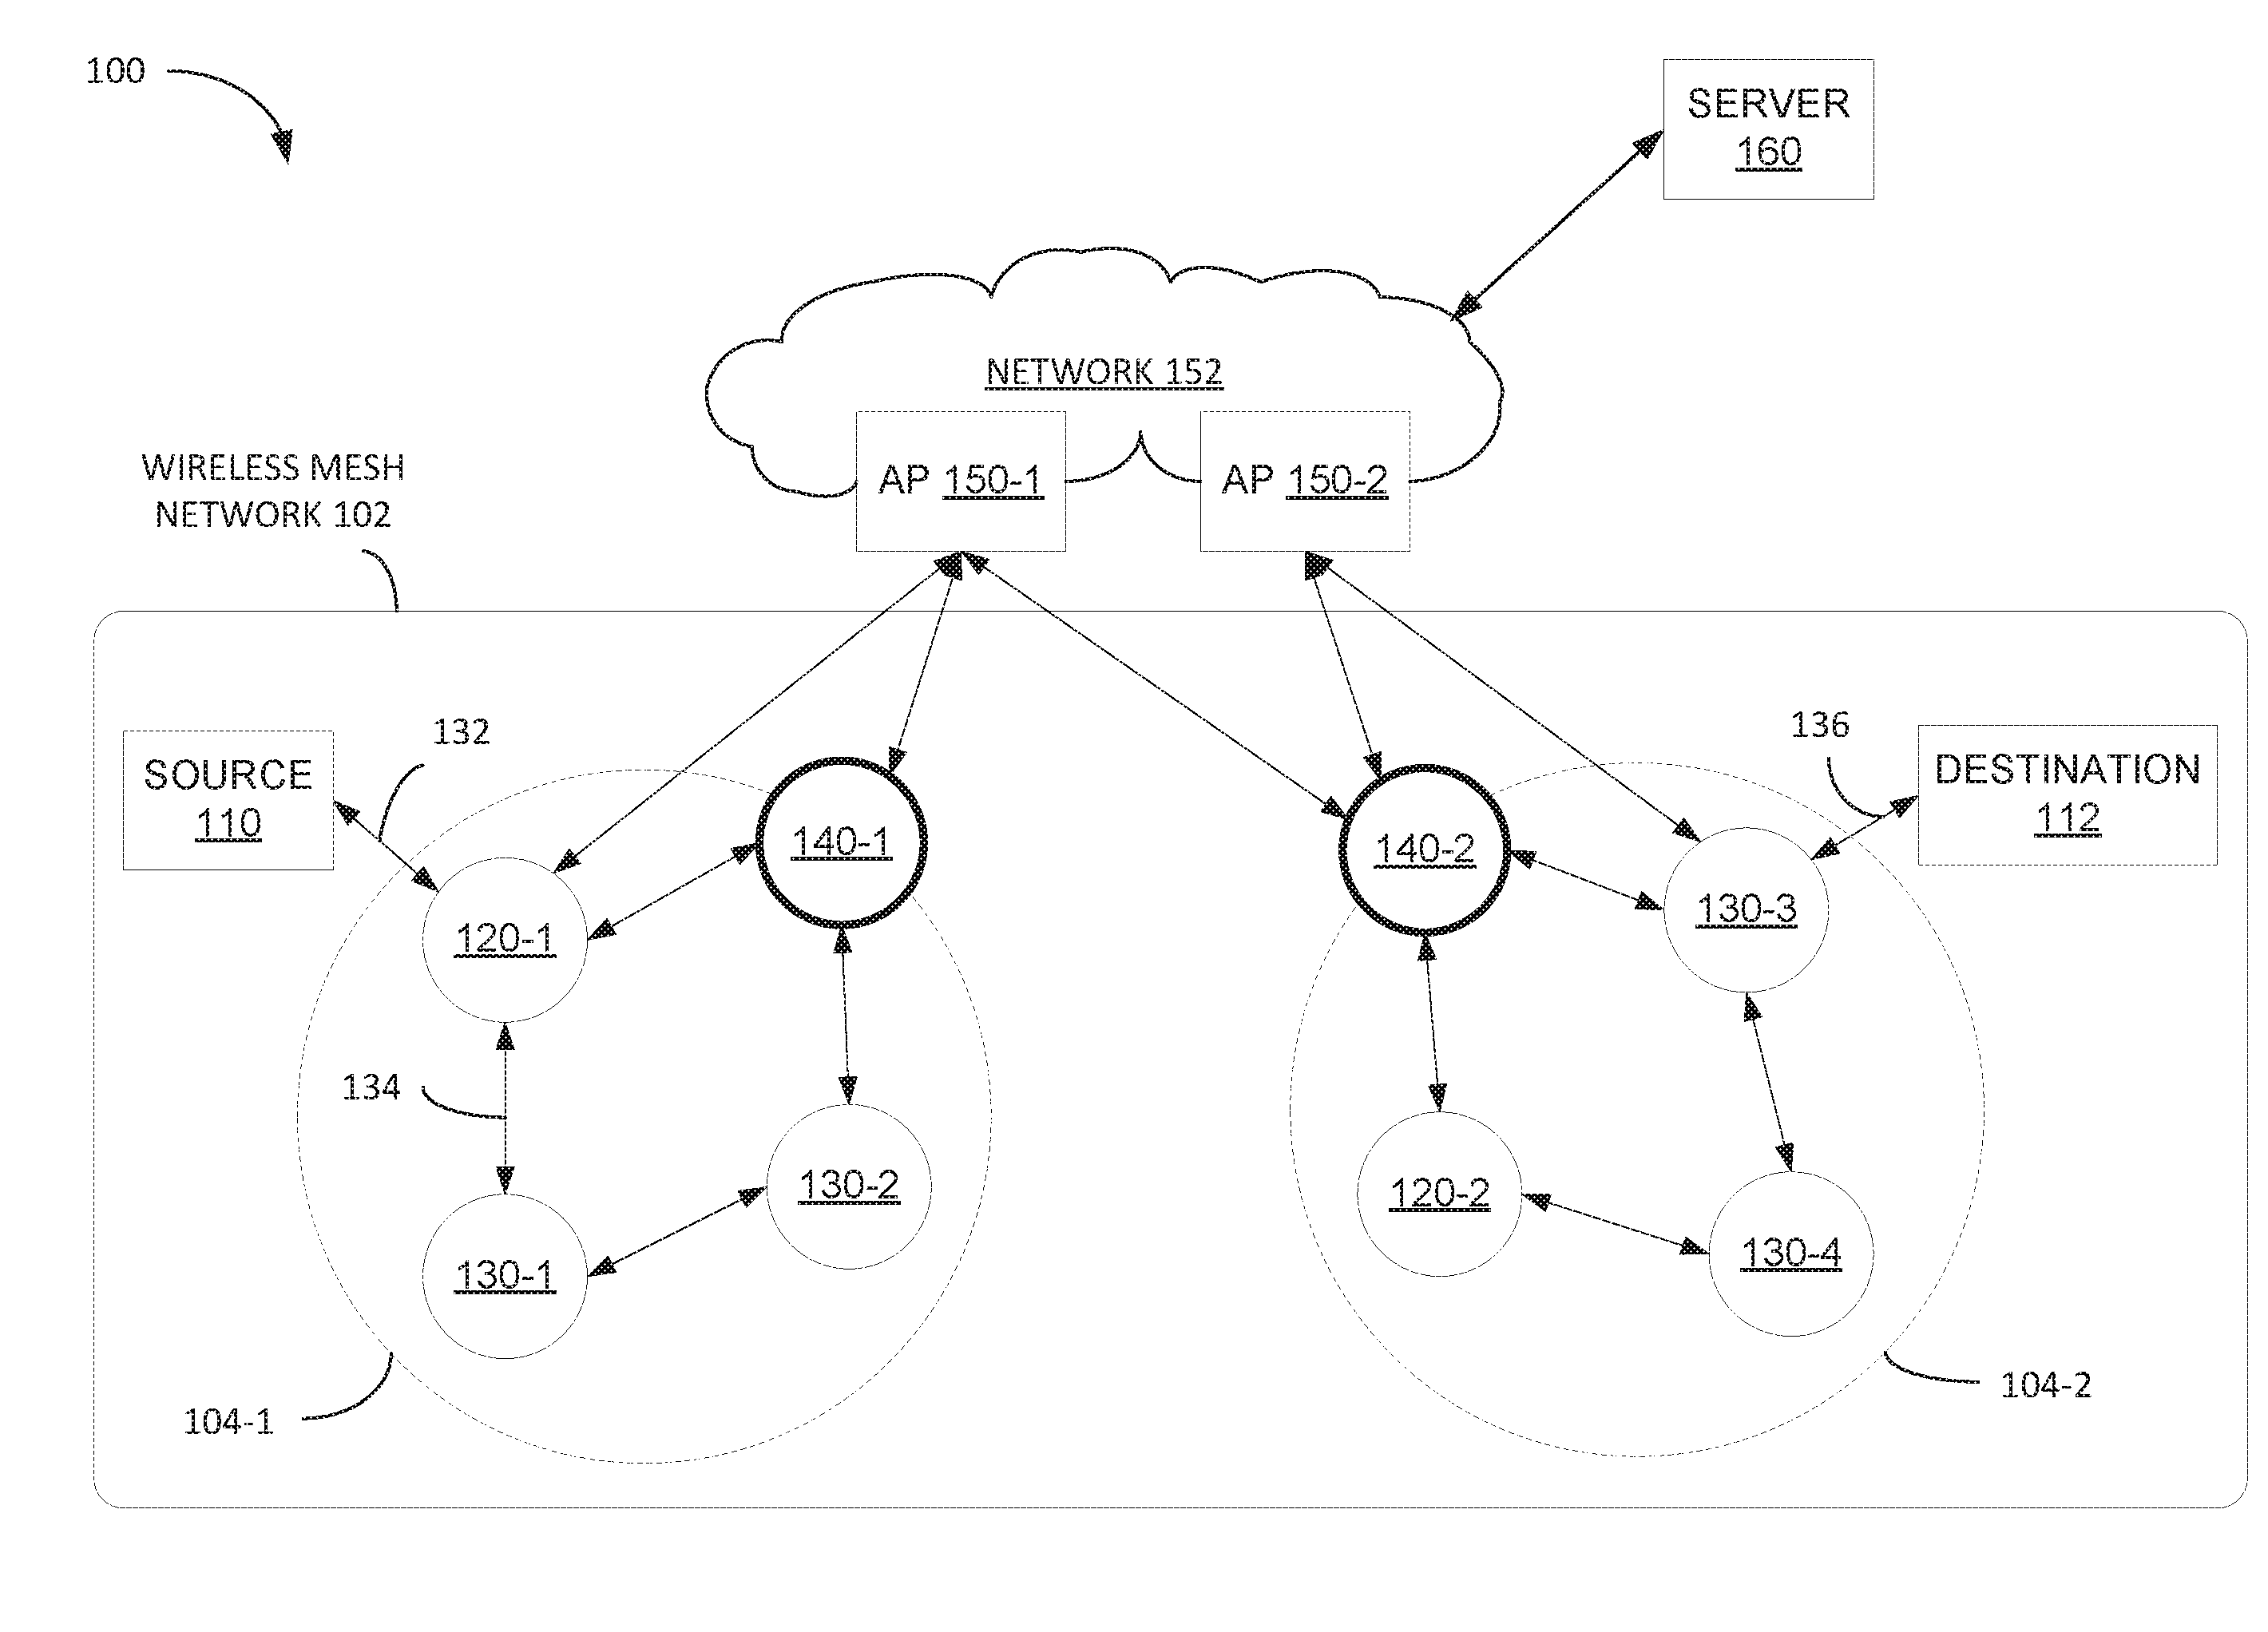 Techniques for managing heterogenous nodes configured to support a homogeneous communication protocol